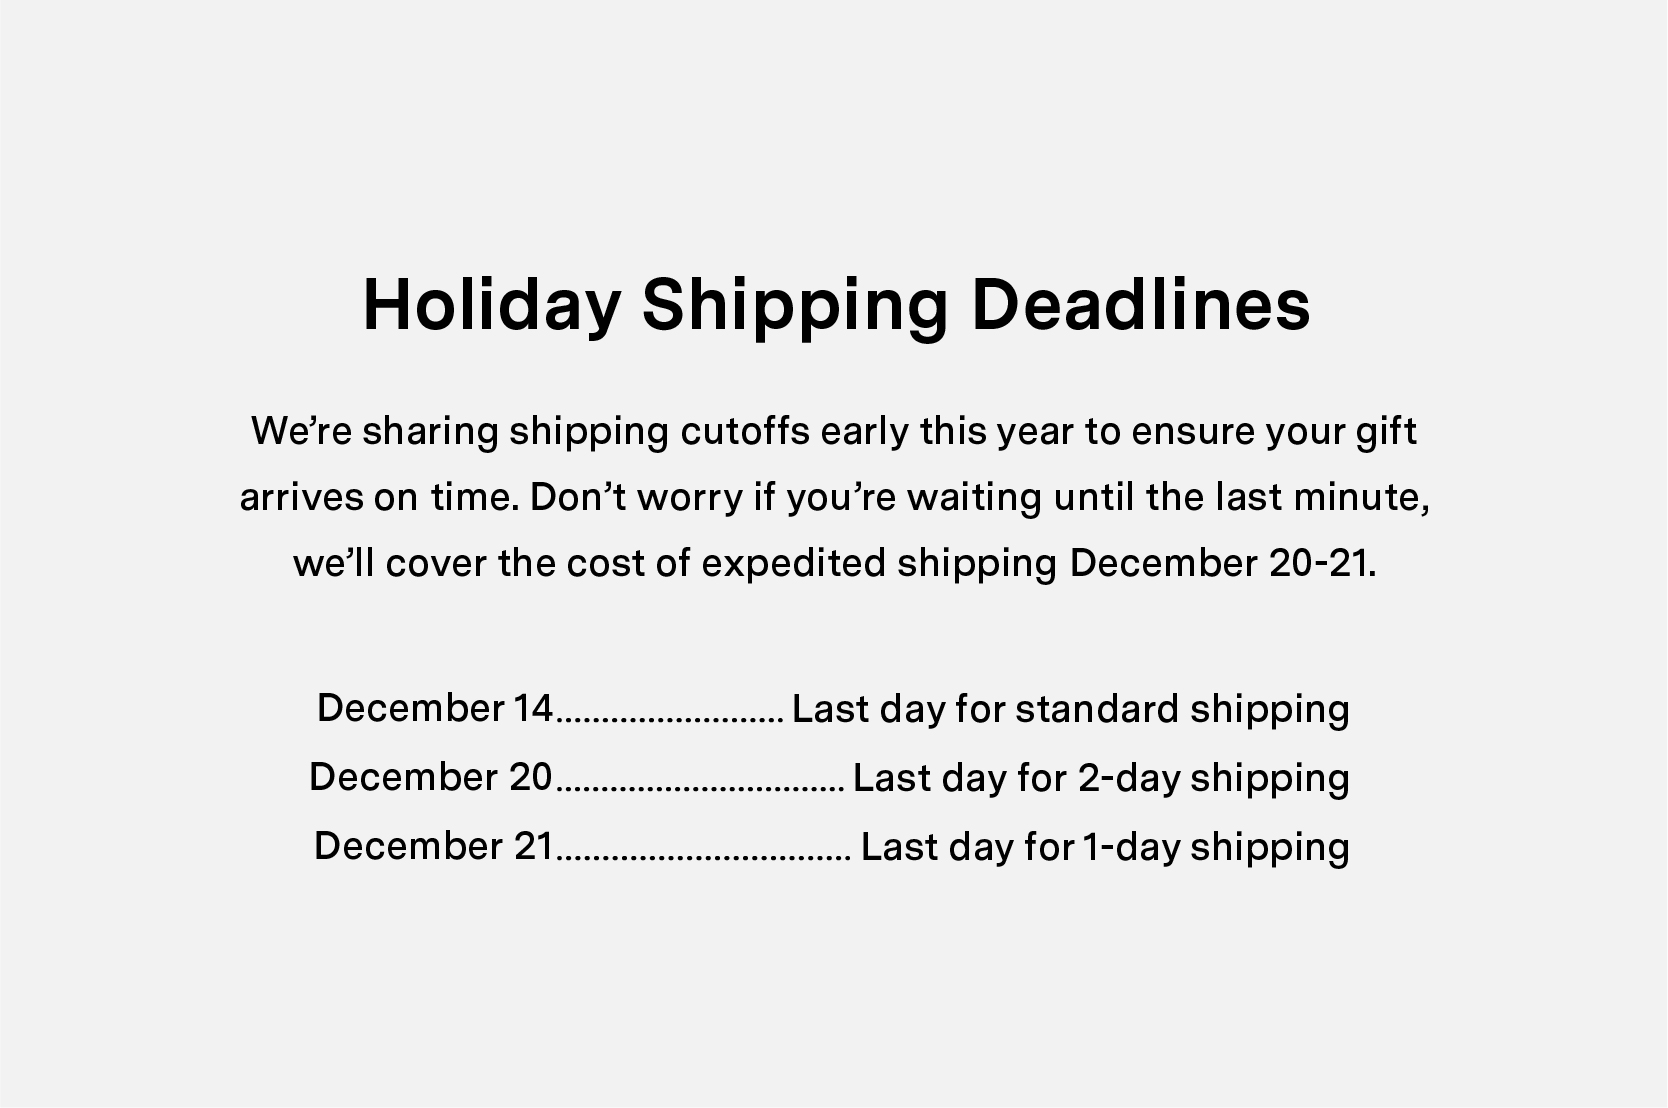 Holiday Shipping Deadlines. We're sharing shipping cutoffs early this year to ensure your gift arrives on time. Don't worry if you're waiting until the last minute, we'll cover the cost of expedited shipping December 20-21.   December 14  - Last day for standard shipping. December 20 - Last day for 2-day shipping.  December 21 - Last day for 1-day shipping. 